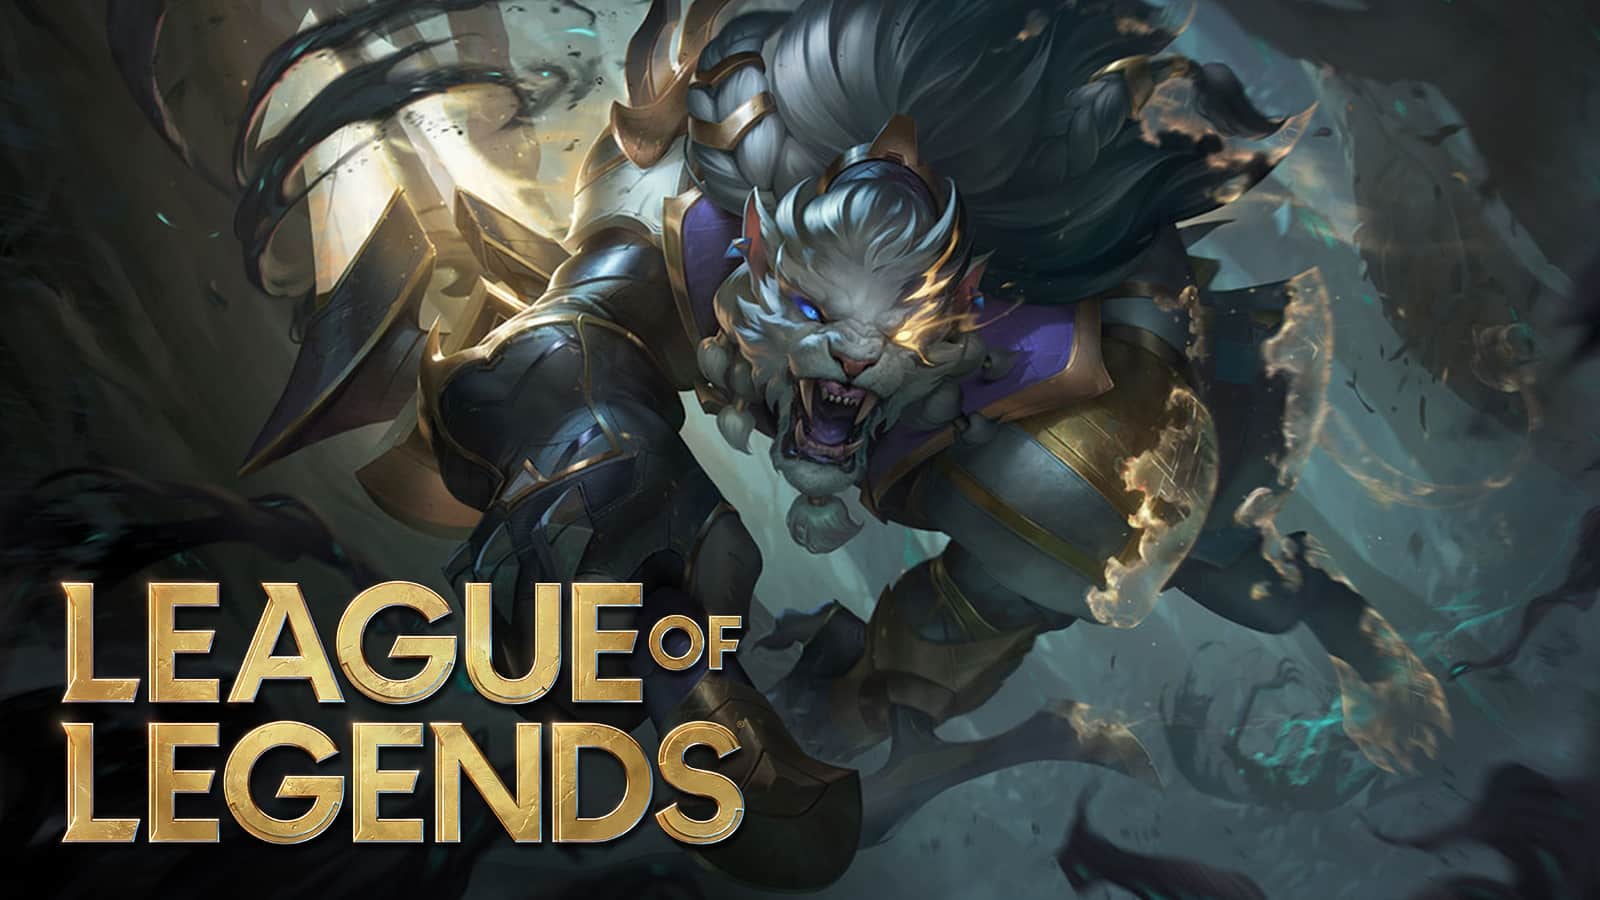 League of Legends new champion is Akshan, abilities and lore revealed